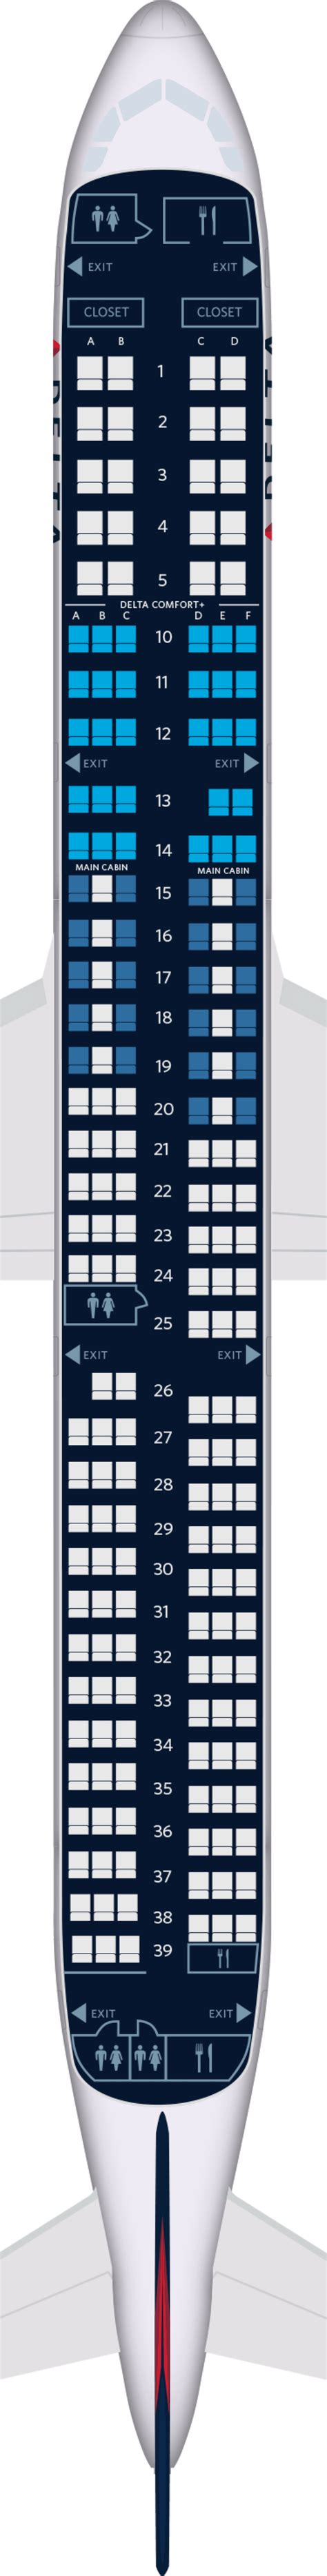 Typically an A321 can seat between 185 and 236 passengers in a single-